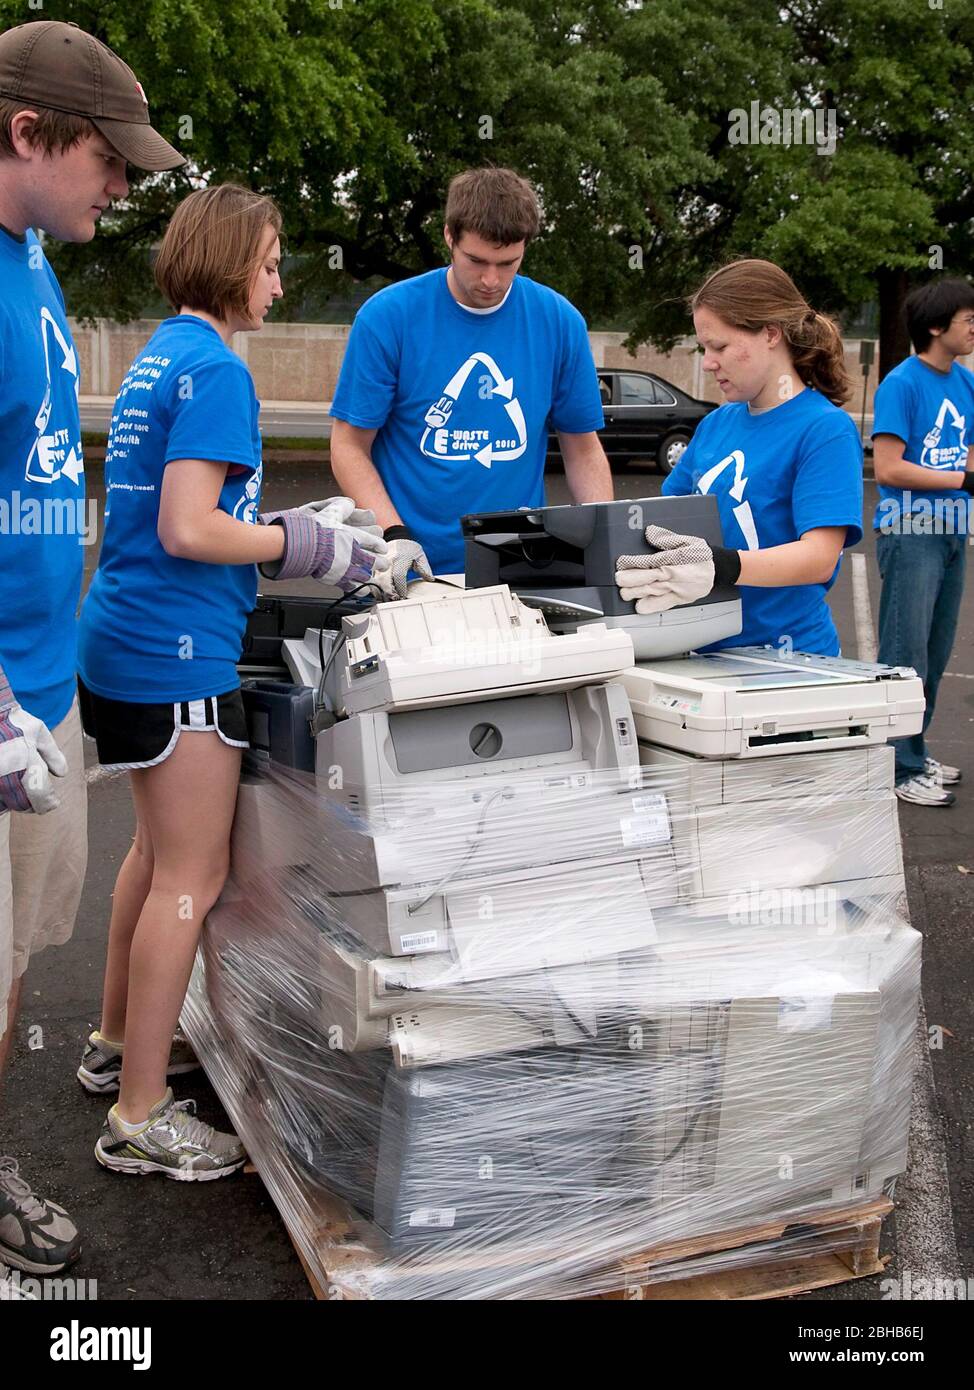 Austin Texas USA, April 17 2010: Engineering students from the University of Texas coordinate an 'E-Waste Drive' to recycle old computers and electronics from households and offices to keep  hazardous materials out of local landfills. About 50 stacks of computers, monitors, printers and televisions were hauled away for proper disposal in the day-long effort. ©Bob Daemmrich Stock Photo